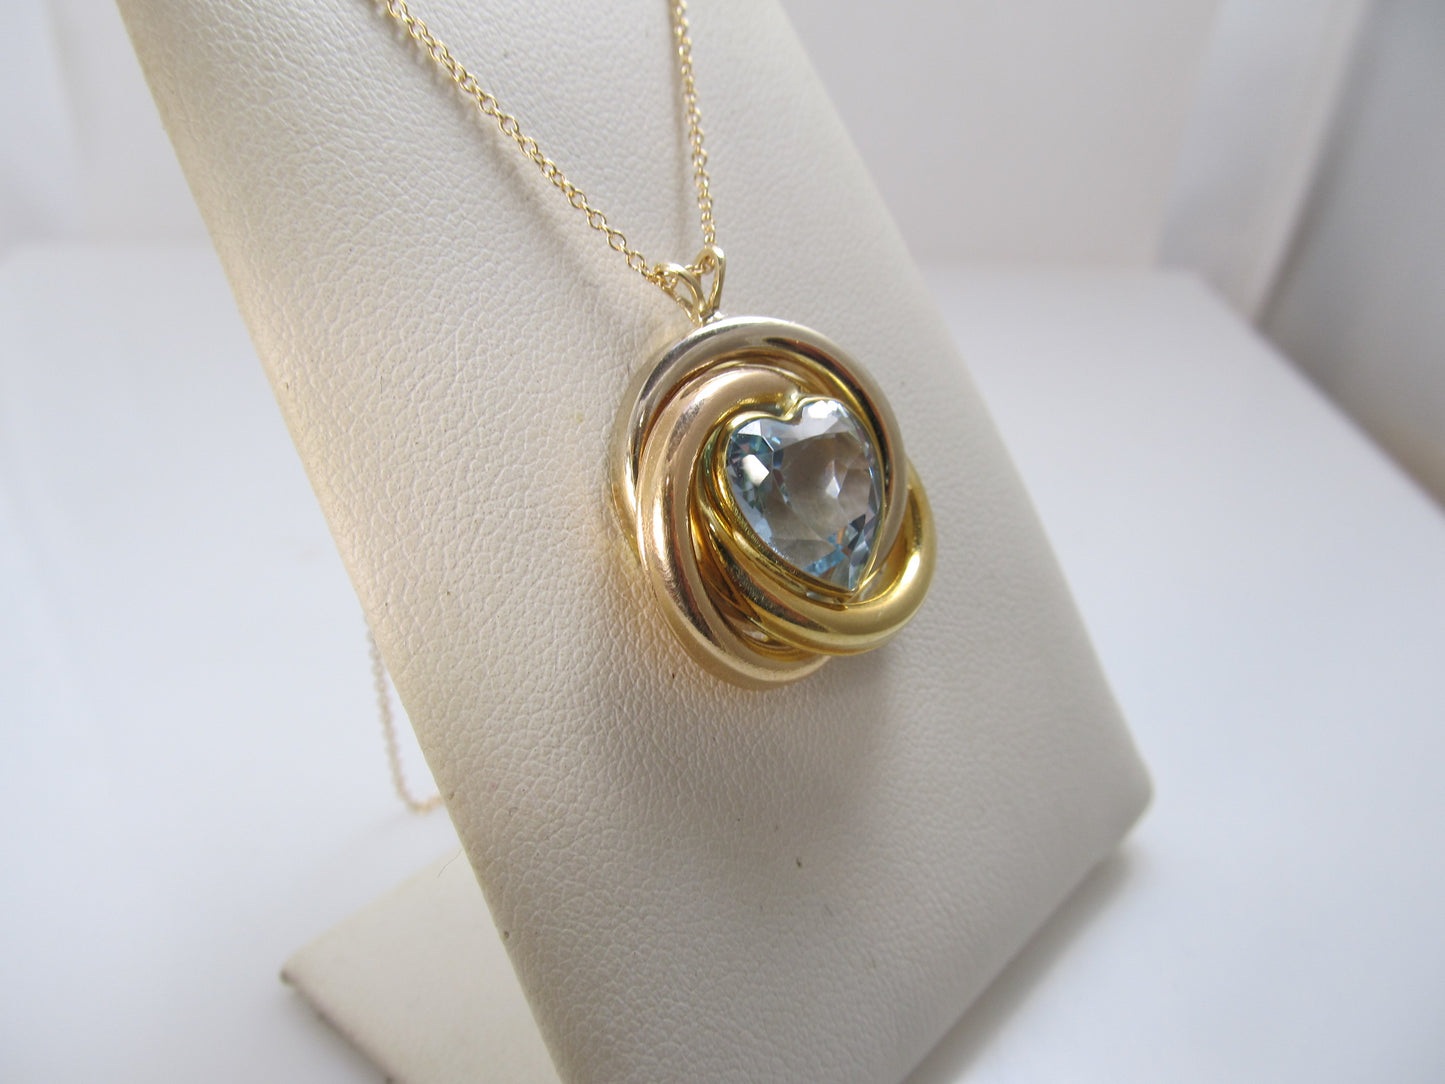 Heart shaped aquamarine necklace in 14k gold